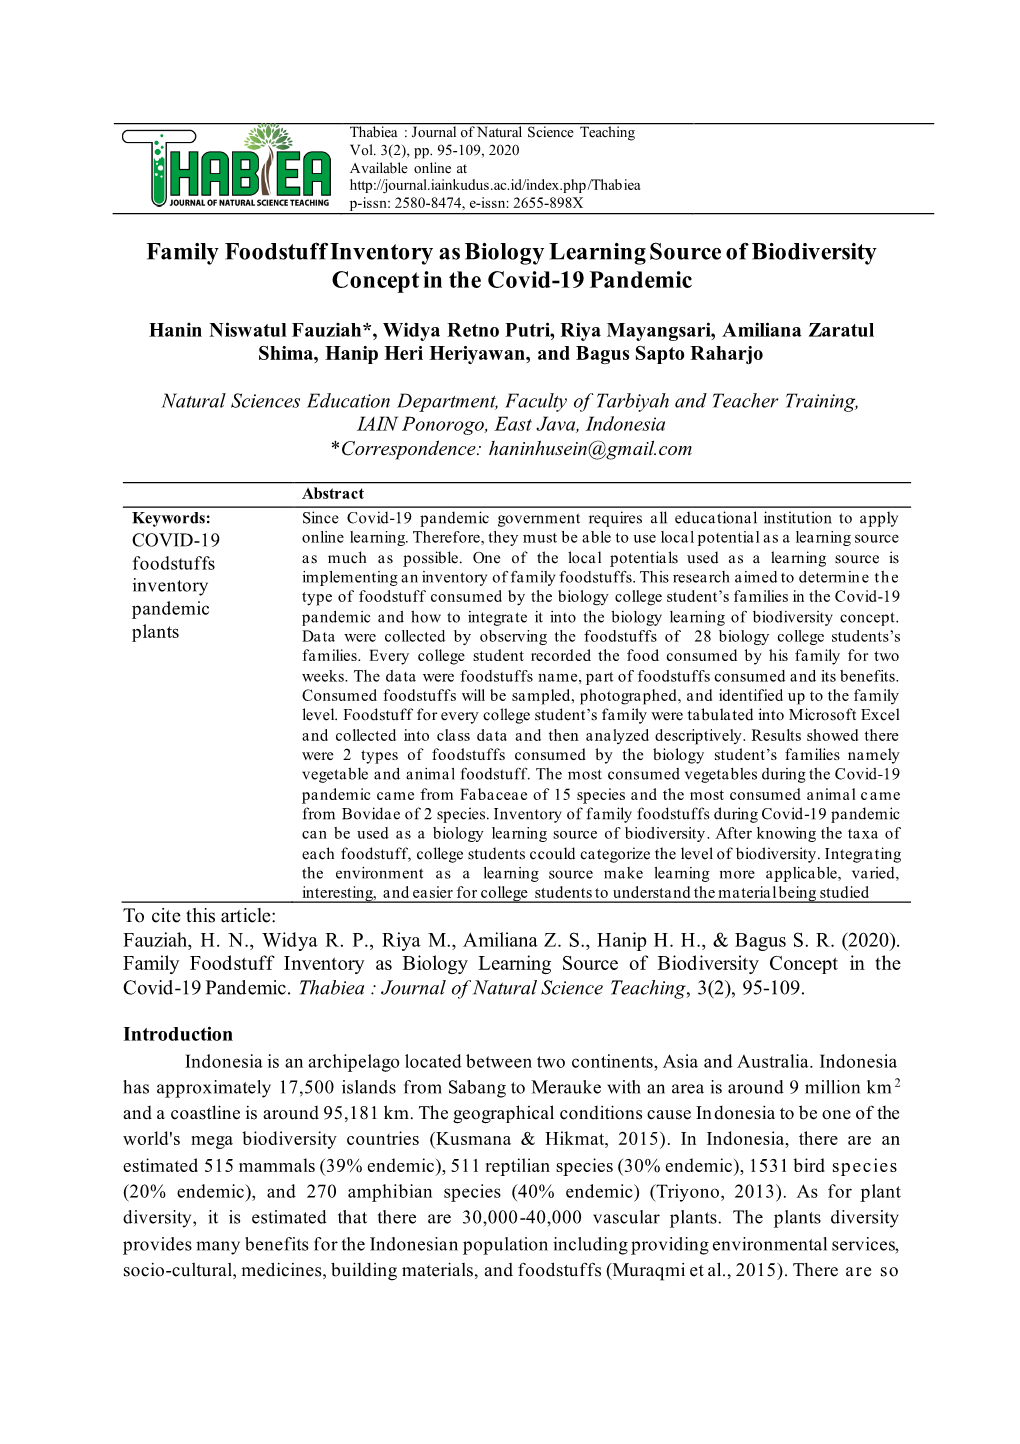 Family Foodstuff Inventory As Biology Learning Source of Biodiversity Concept in the Covid-19 Pandemic